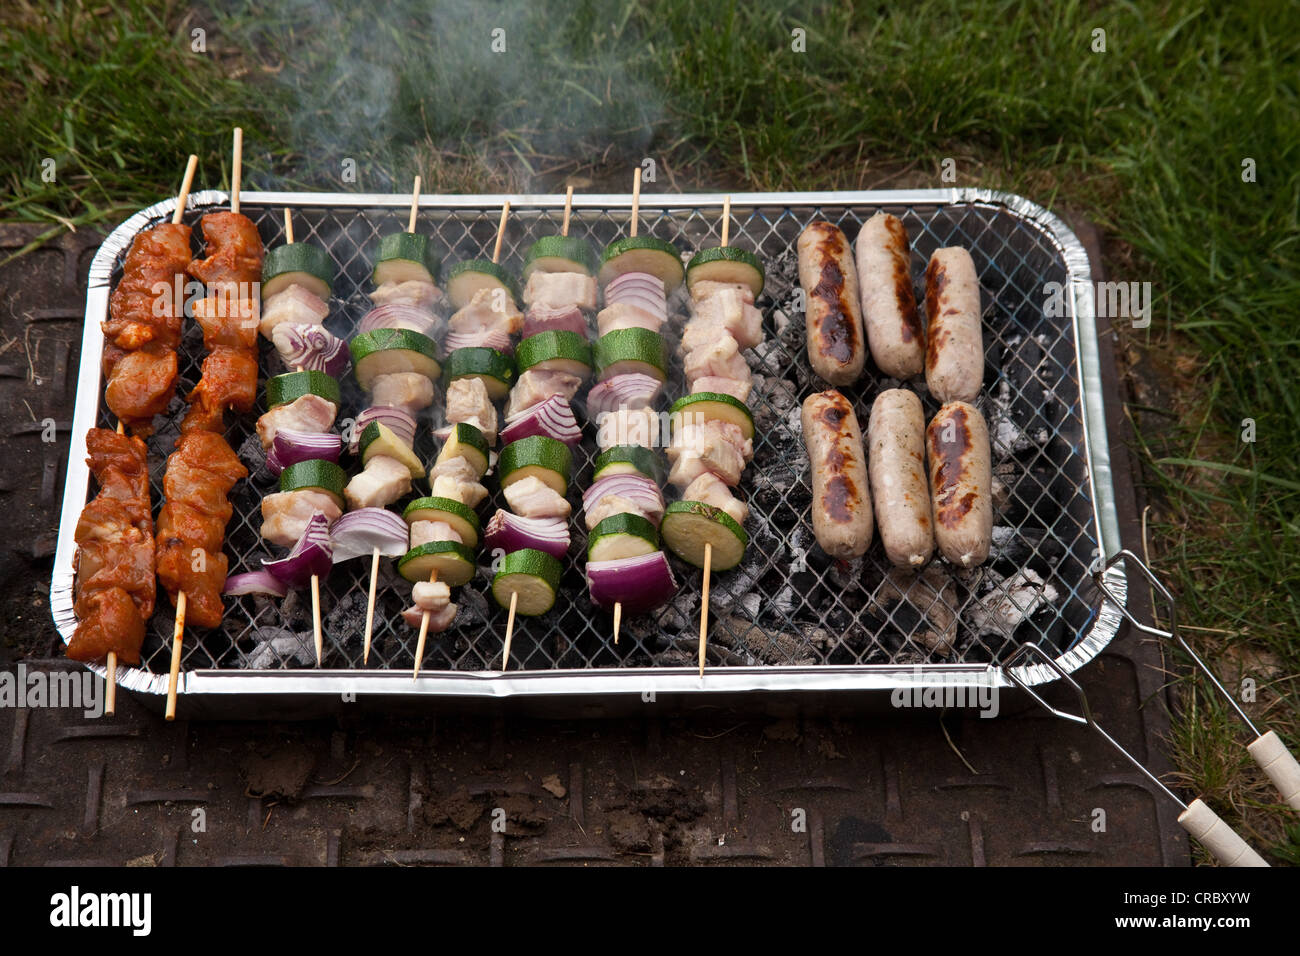 Disposable charcoal barbecue cooking kebabs and sausages. Stock Photo